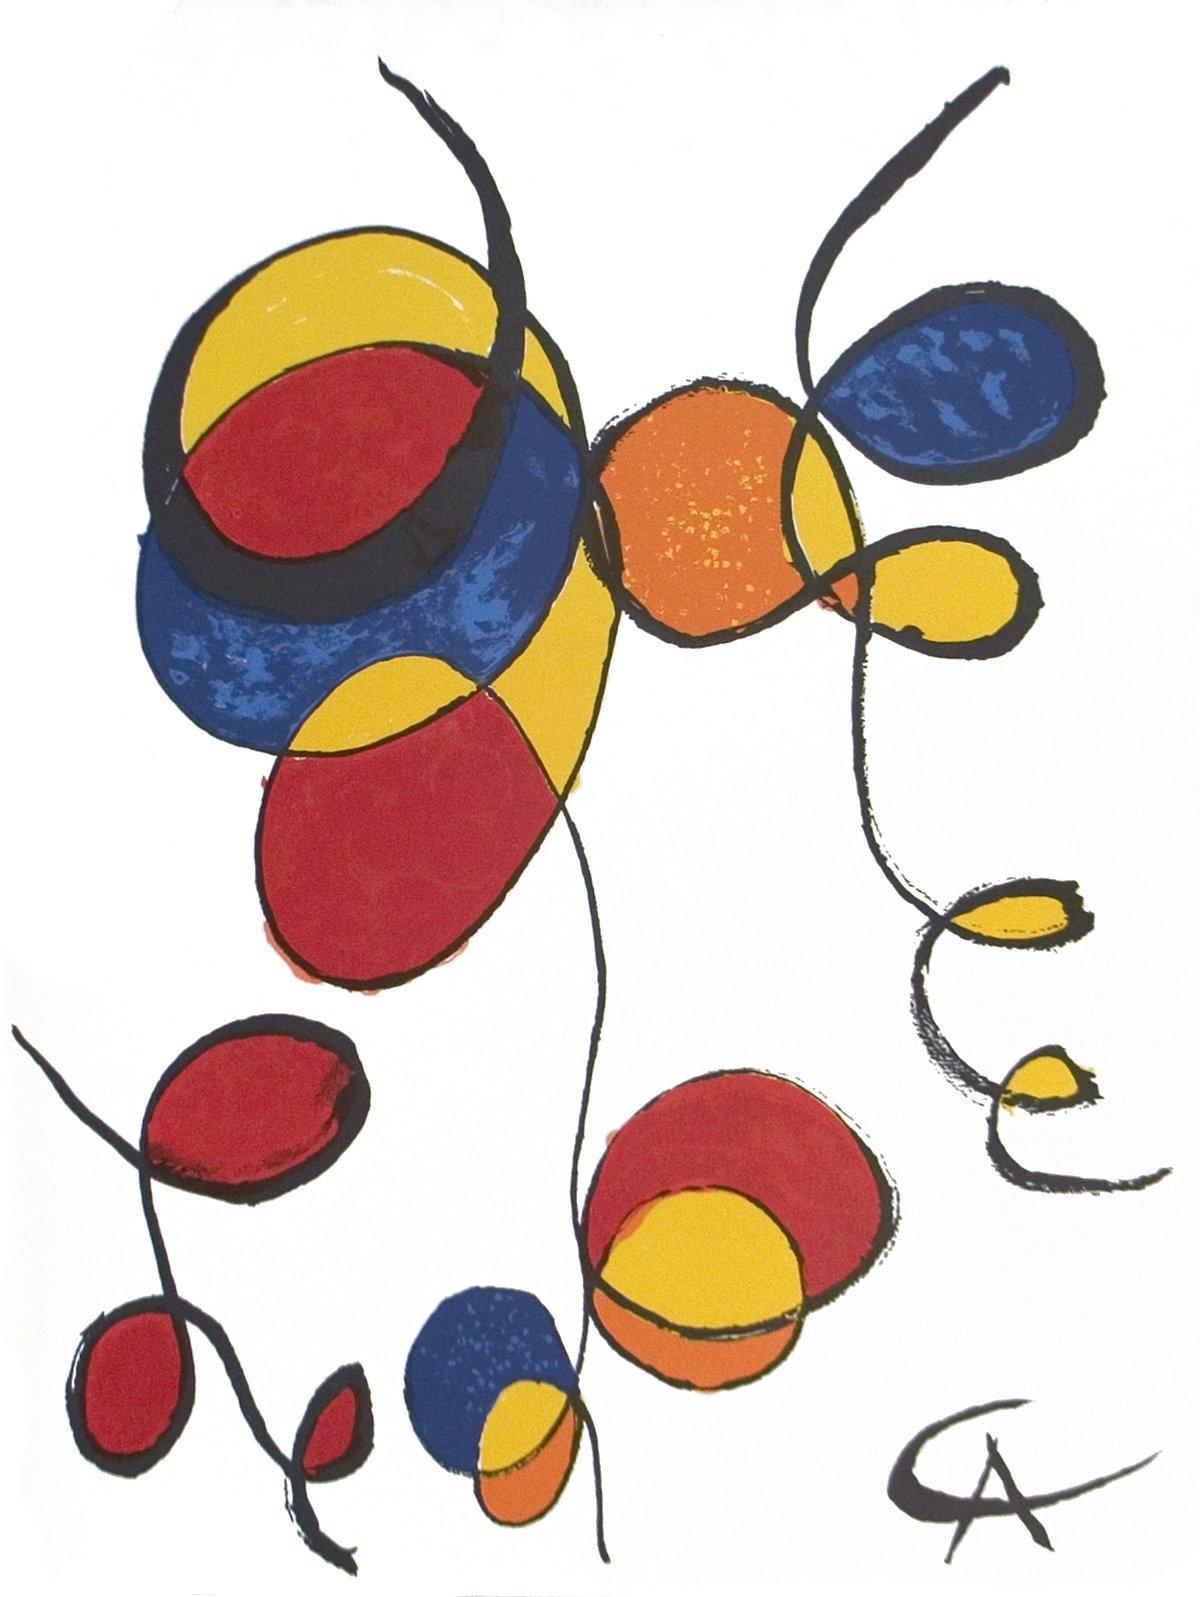 Paper Size: 15 x 11.5 inches ( 38.1 x 29.21 cm )
 Image Size: 15 x 11.5 inches ( 38.1 x 29.21 cm )
 Framed: No
 Condition: A: Mint
 
 Additional Details: First release lithograph titled Spirales by Alexander Calder, plate signed, not numbered.